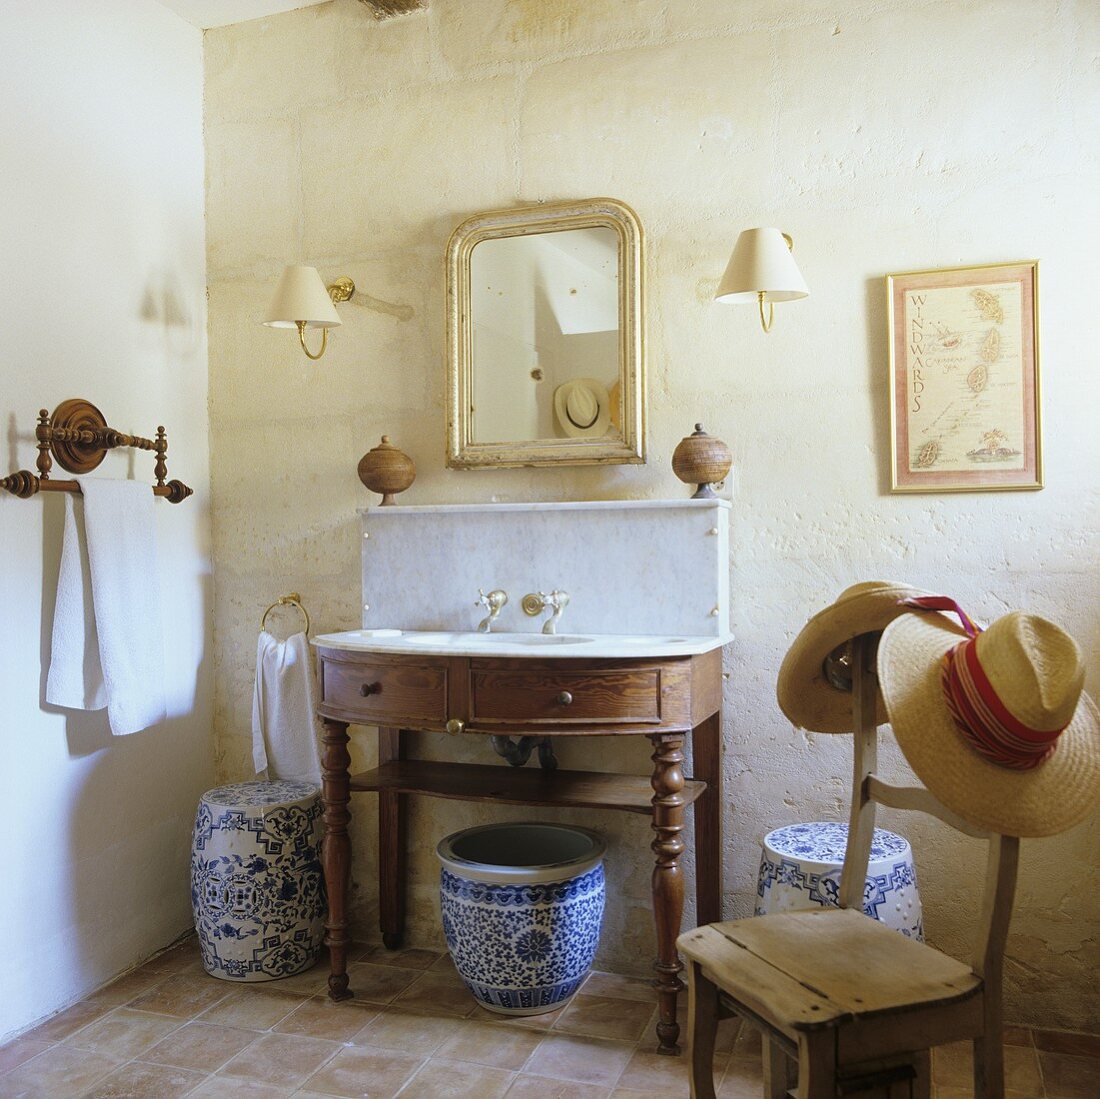 Ceramic jars under a simple washstand in a rustic house